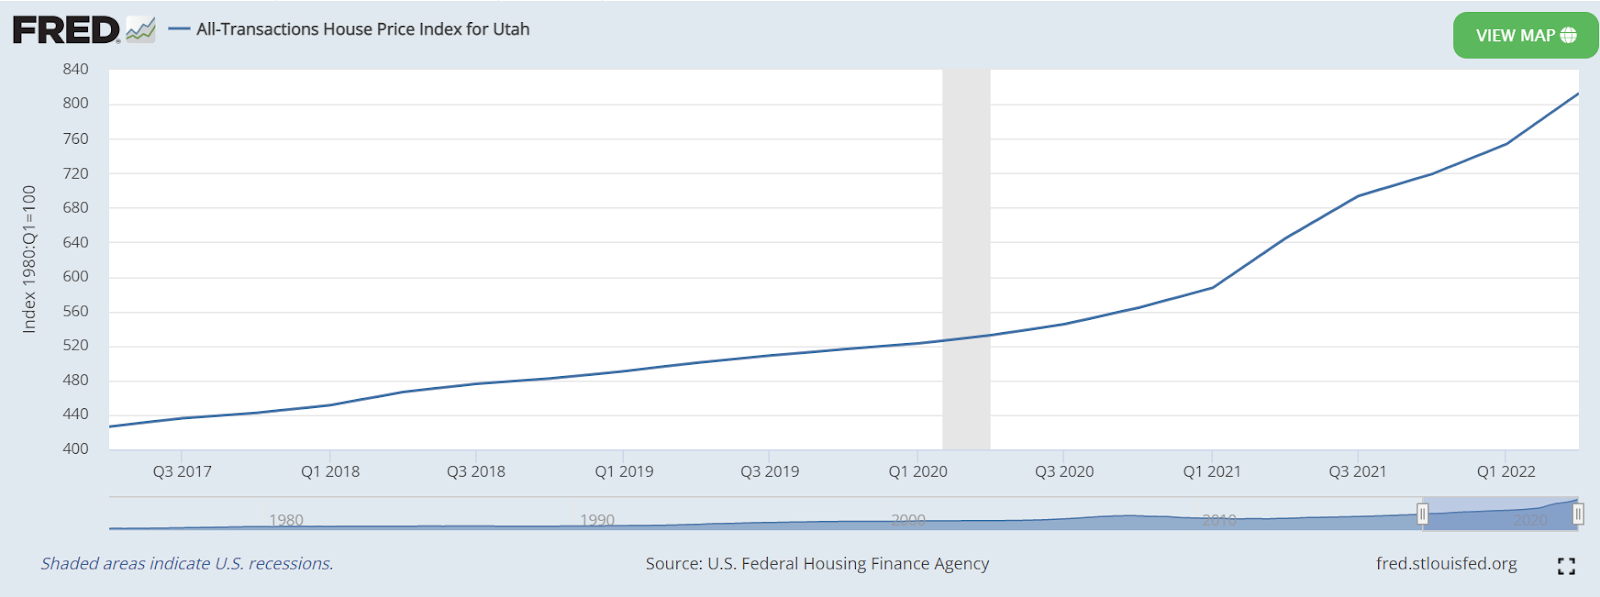 Housing values have increased over the past 5 years, with a sharp increase over the past year.